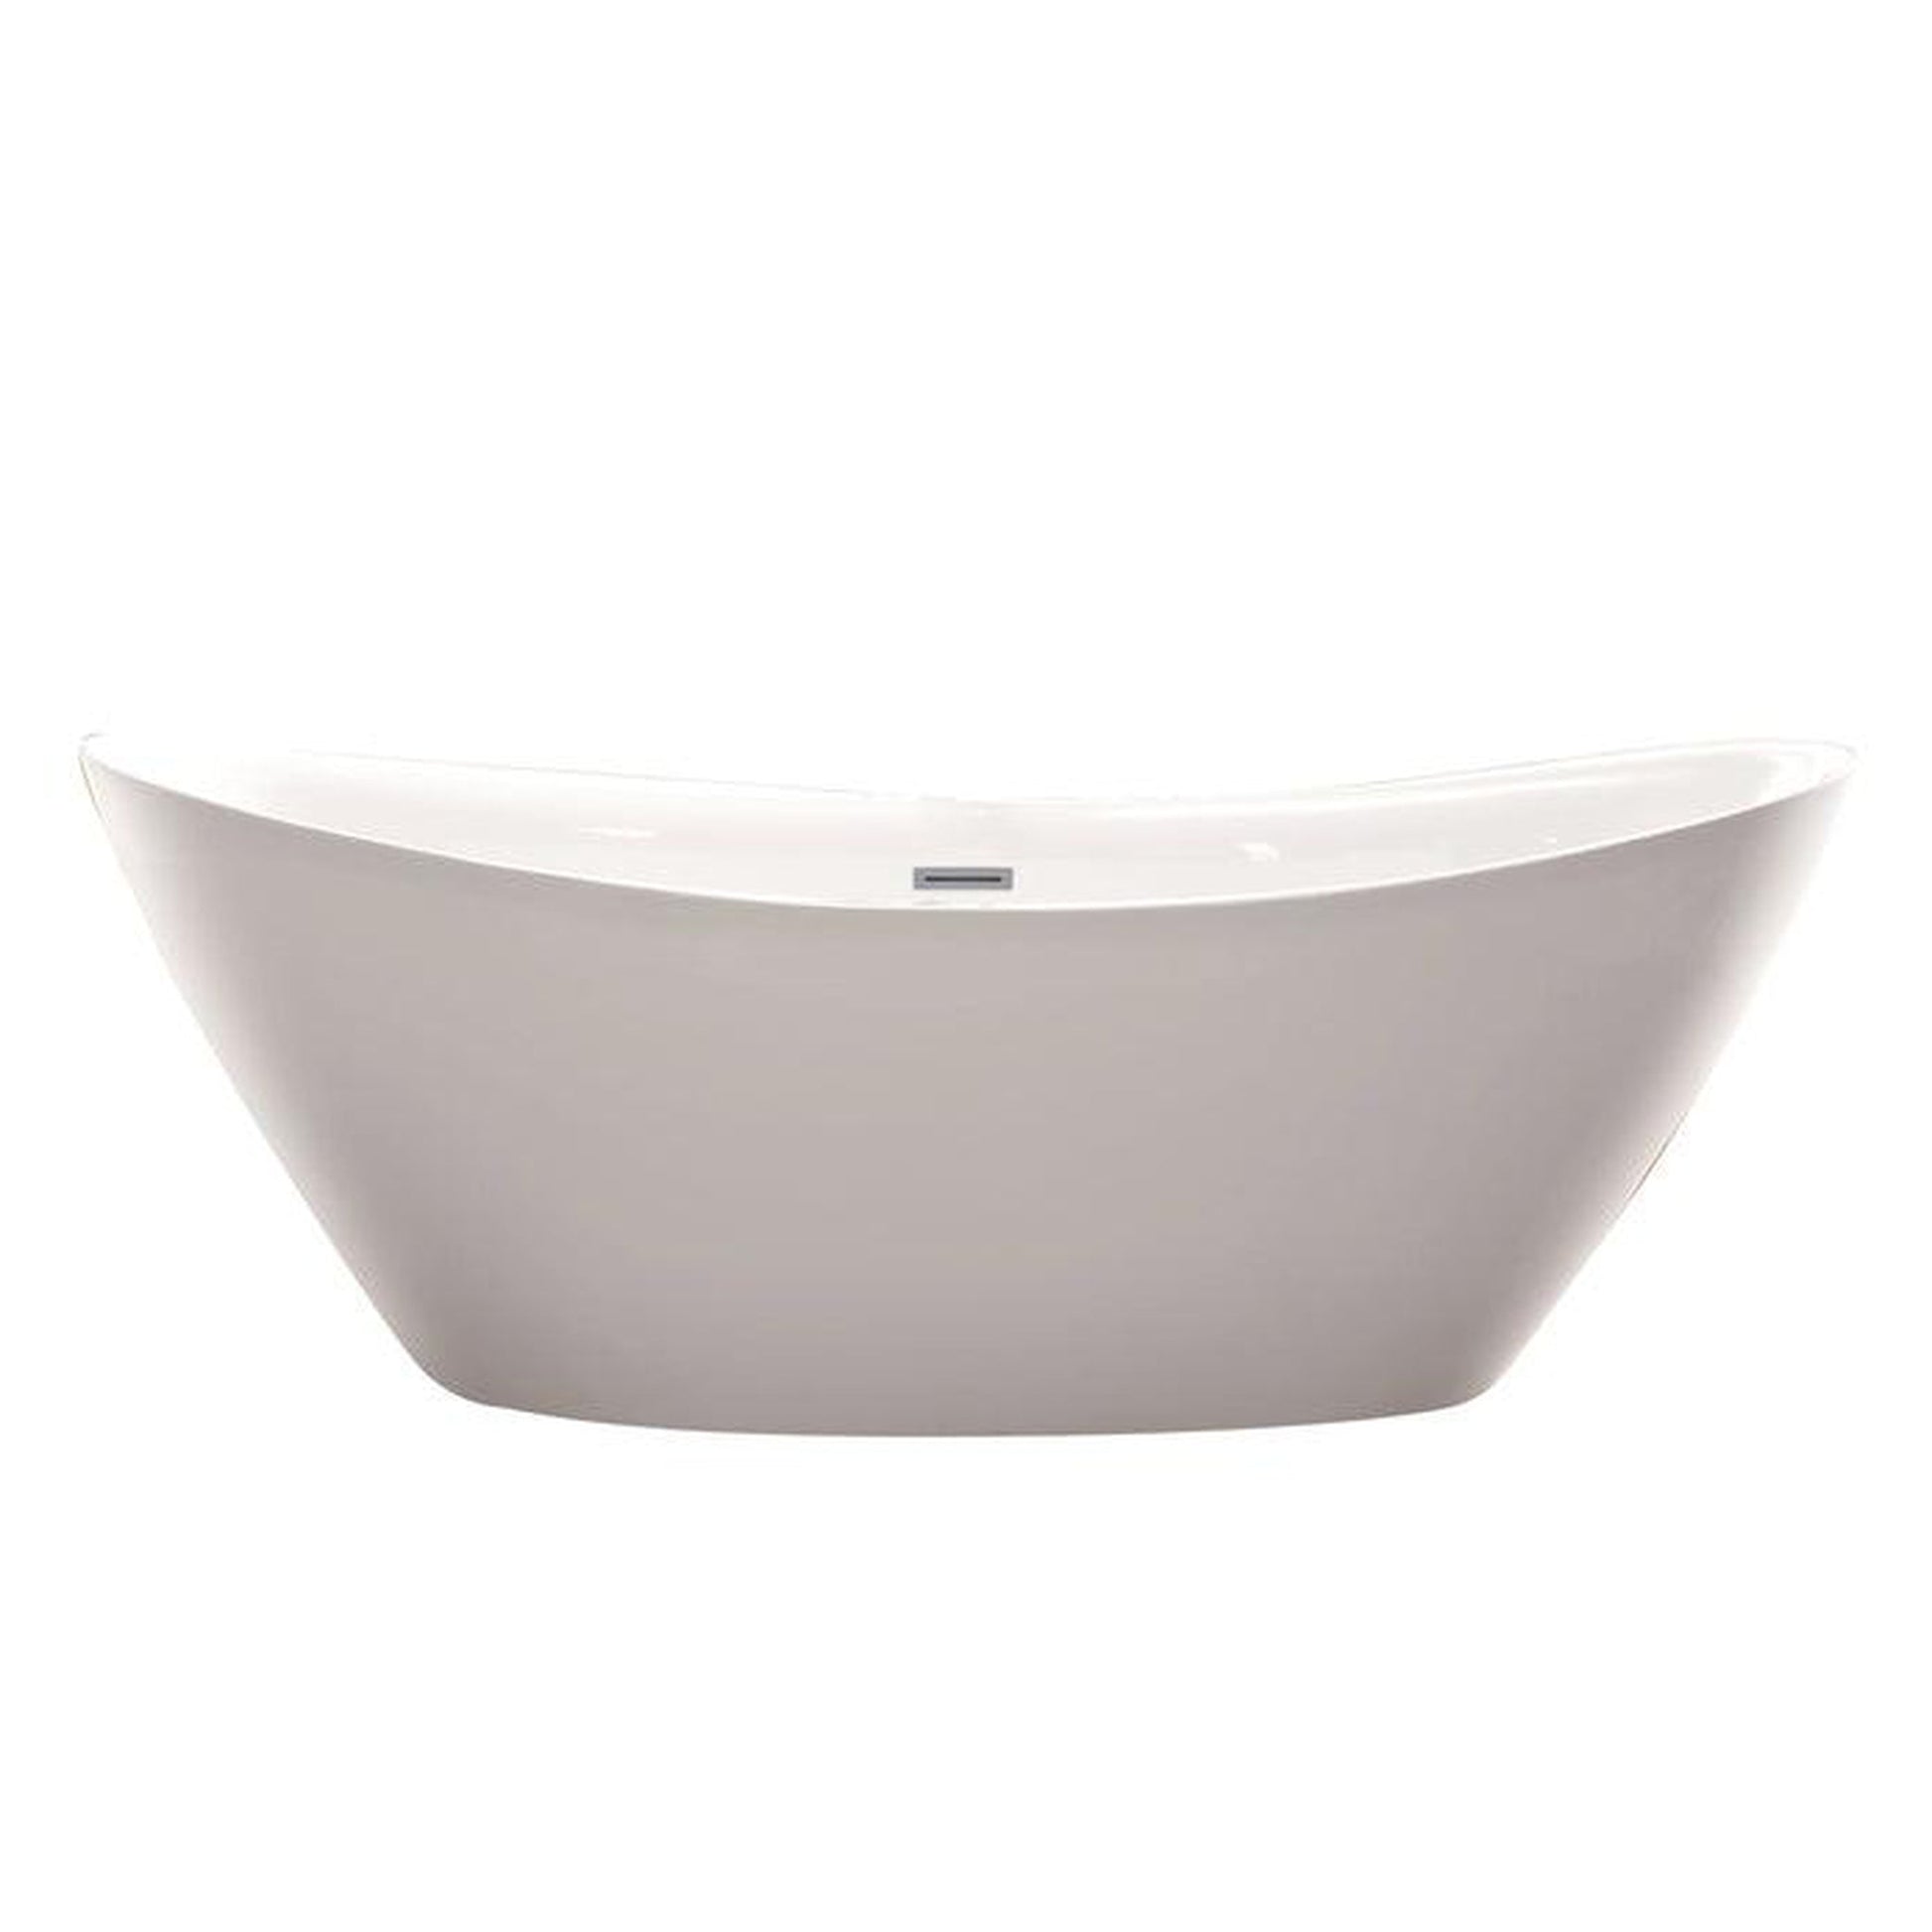 Vanity Art 71" W x 26" H White Acrylic Non-Slip Oval Freestanding Bathtub With Brushed Nickel Pop-up Drain, Overflow and Flexible Drain Hose